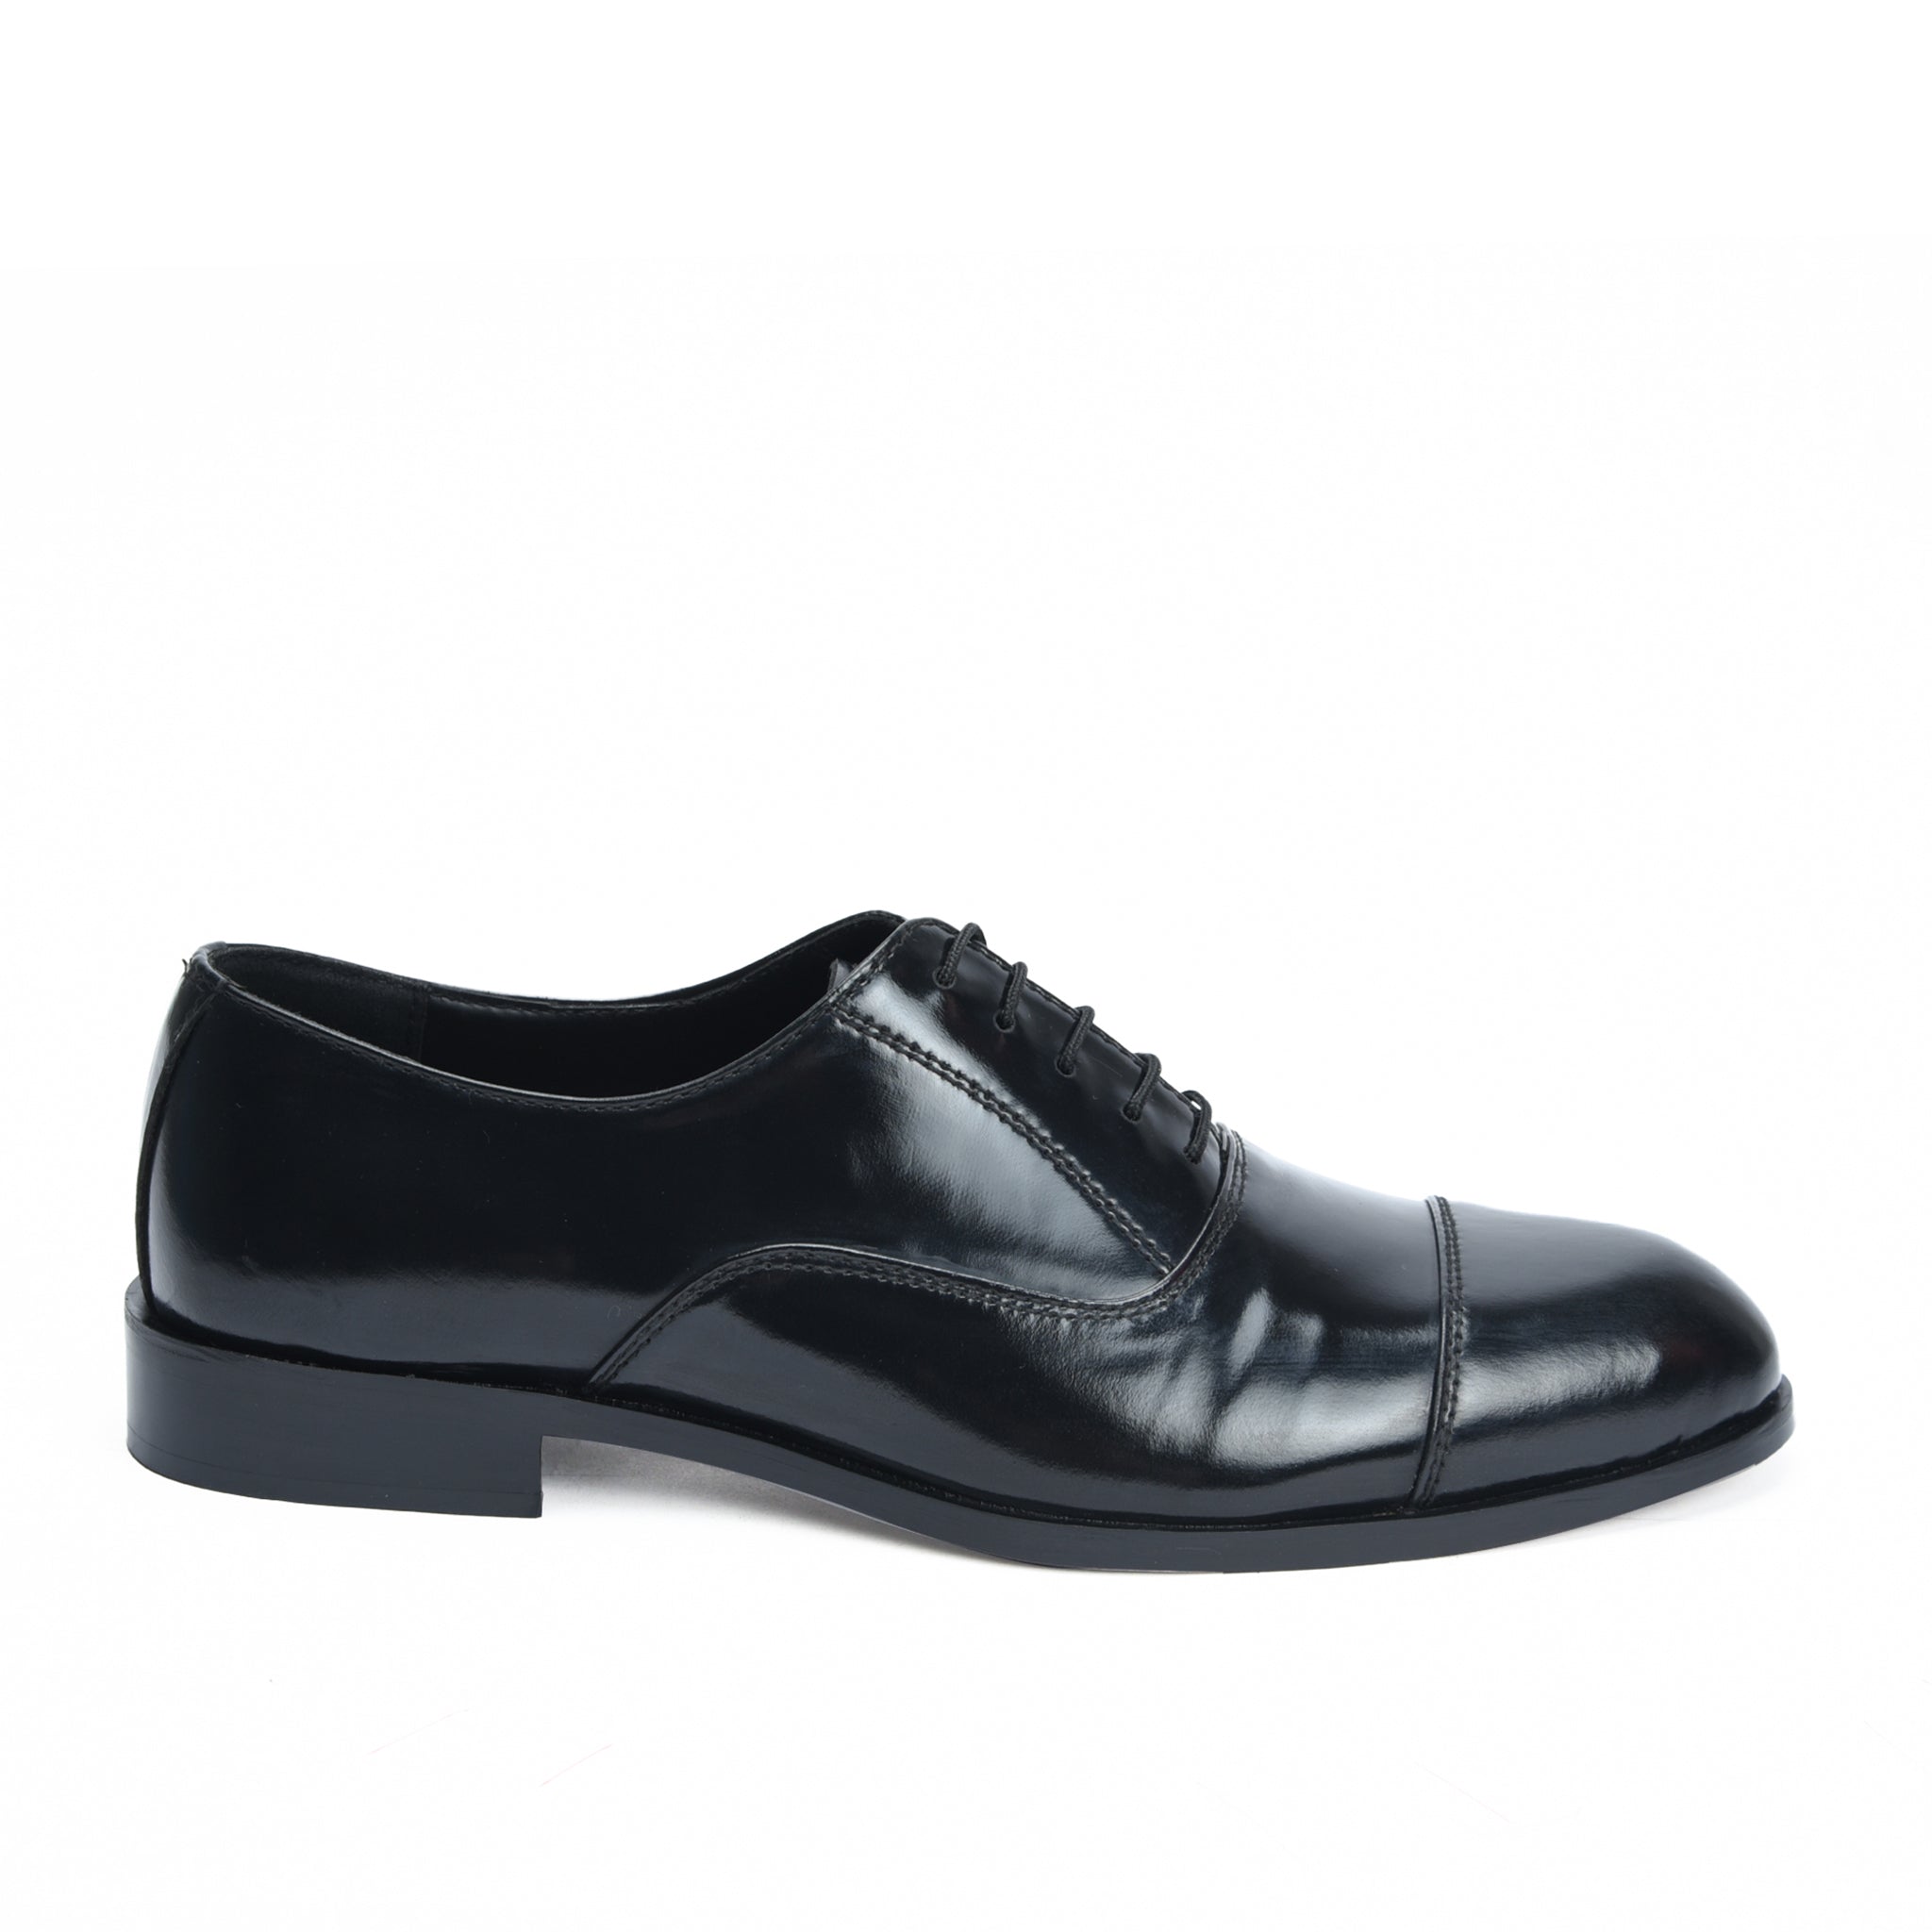 Black Patent Oxford Shoes – The Woodpecker shoes